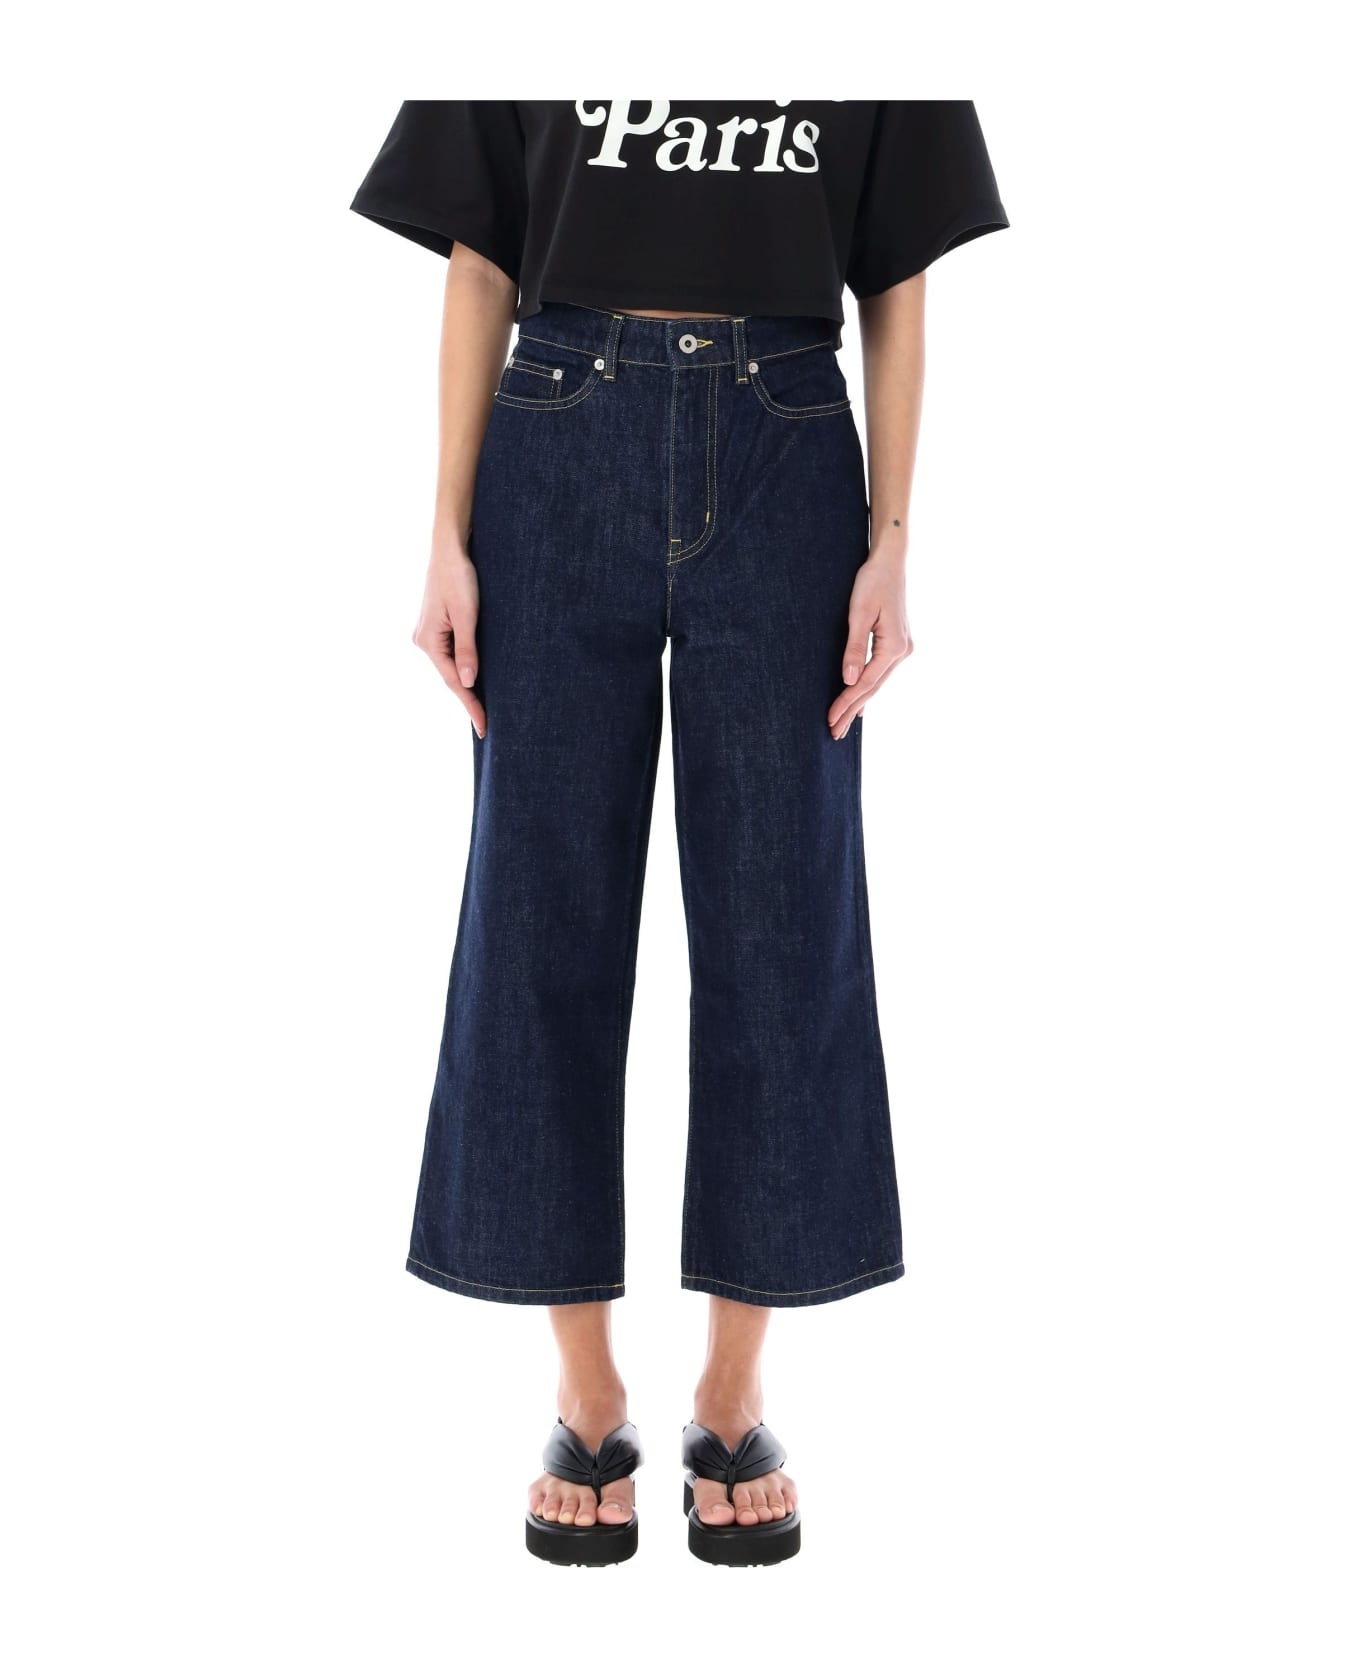 Sumire Cropped Jeans - 1